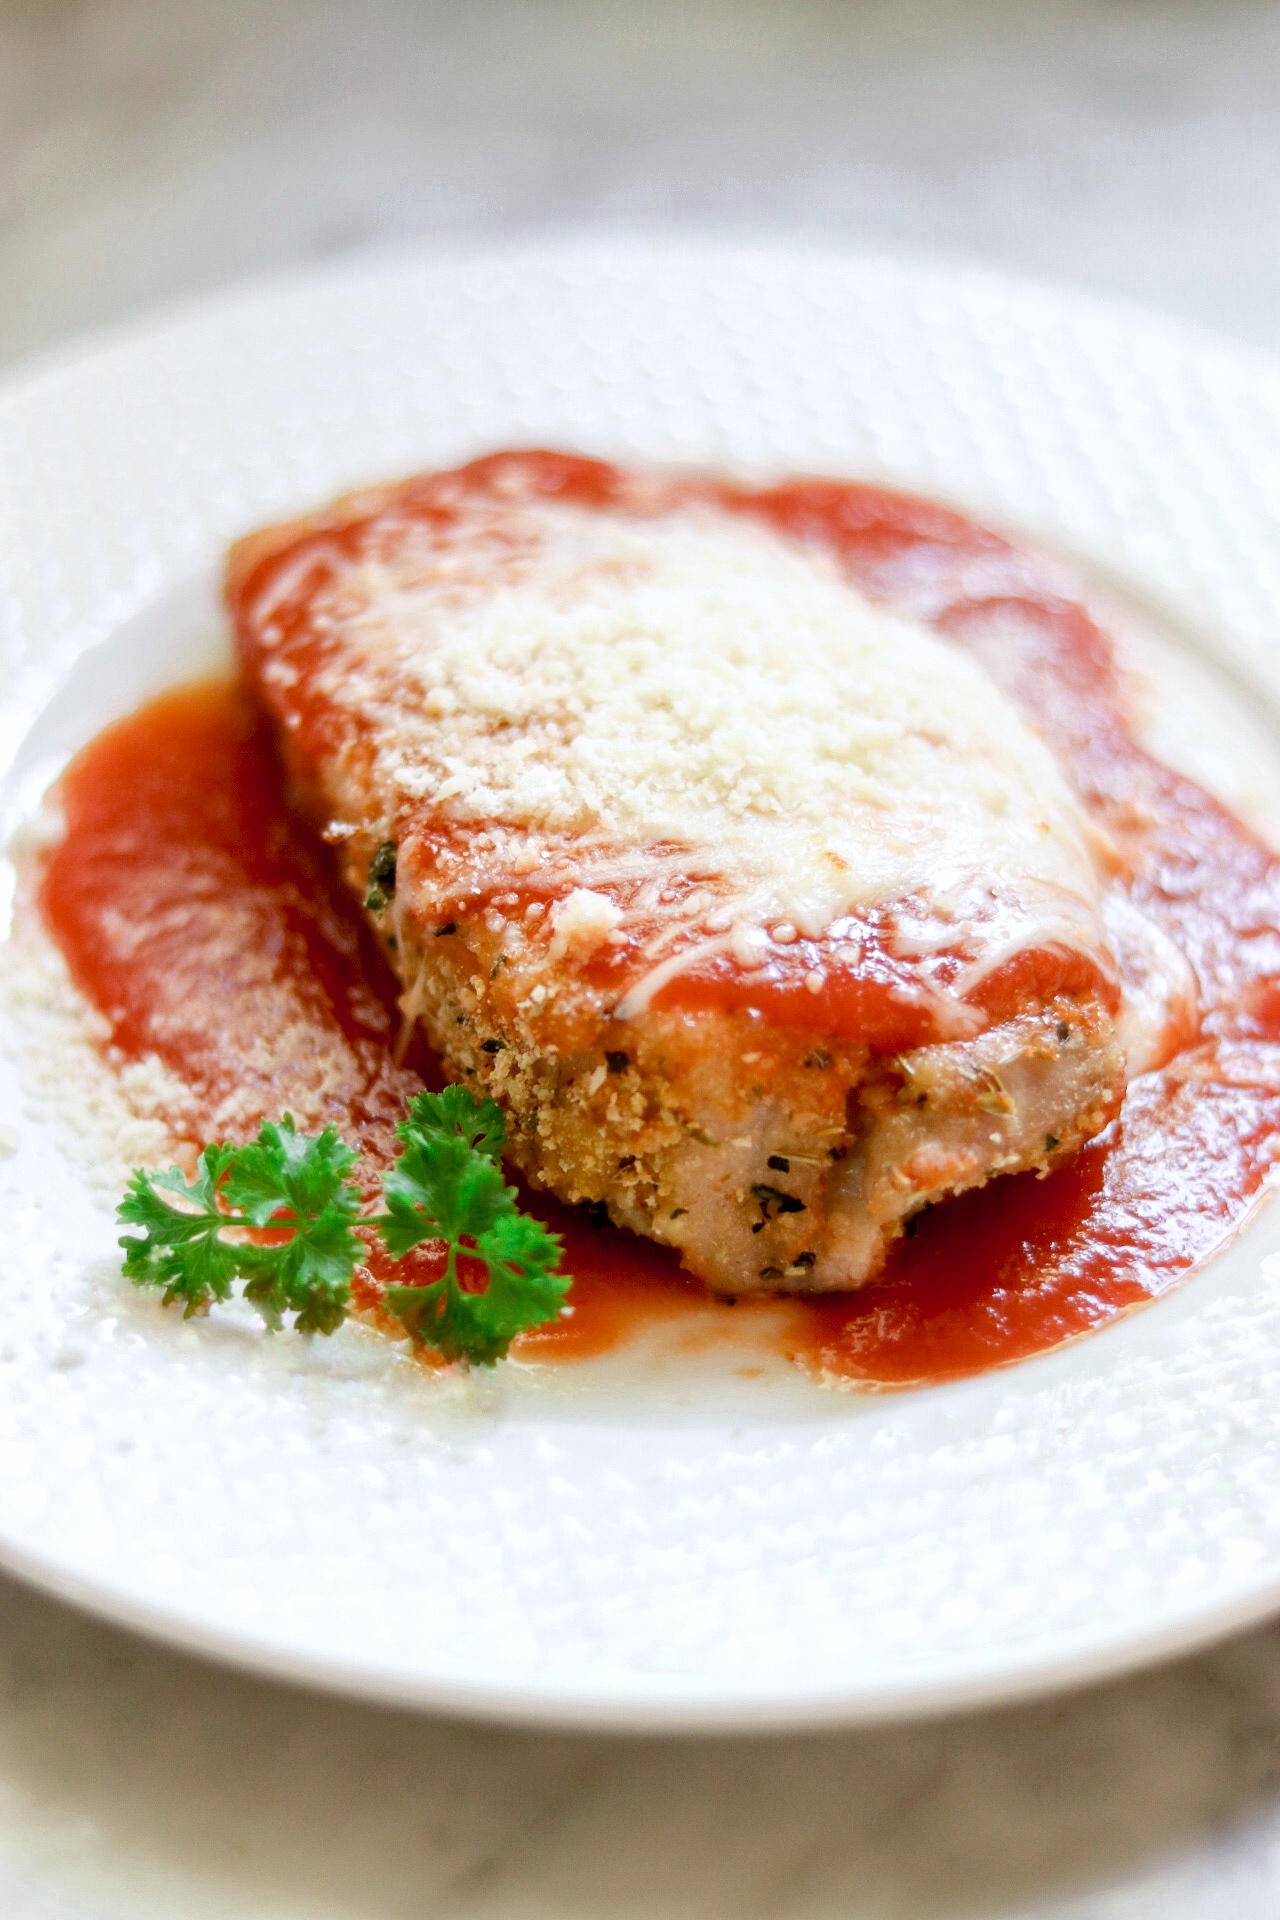 <p>Chicken Parm is a favorite Italian dinner any day of the week, but if your family wants it Monday through Friday, you probably don't have the time to pound, coat, and fry the cutlets. So instead, use this make-ahead version that lets you get it on the table faster.</p>
                          <p>But if you're just looking for a great chicken Parmesan restaurant, one reviewer says it's great the first time you cook it, too: "This is so easy and taste better than the Chicken Parmesan at Olive Garden!! I didn't make it ahead, just did it all at once. We did fettuccine noodles with it and it is a definite make again soon from family!" writes Tina O'Neal.</p>
                          